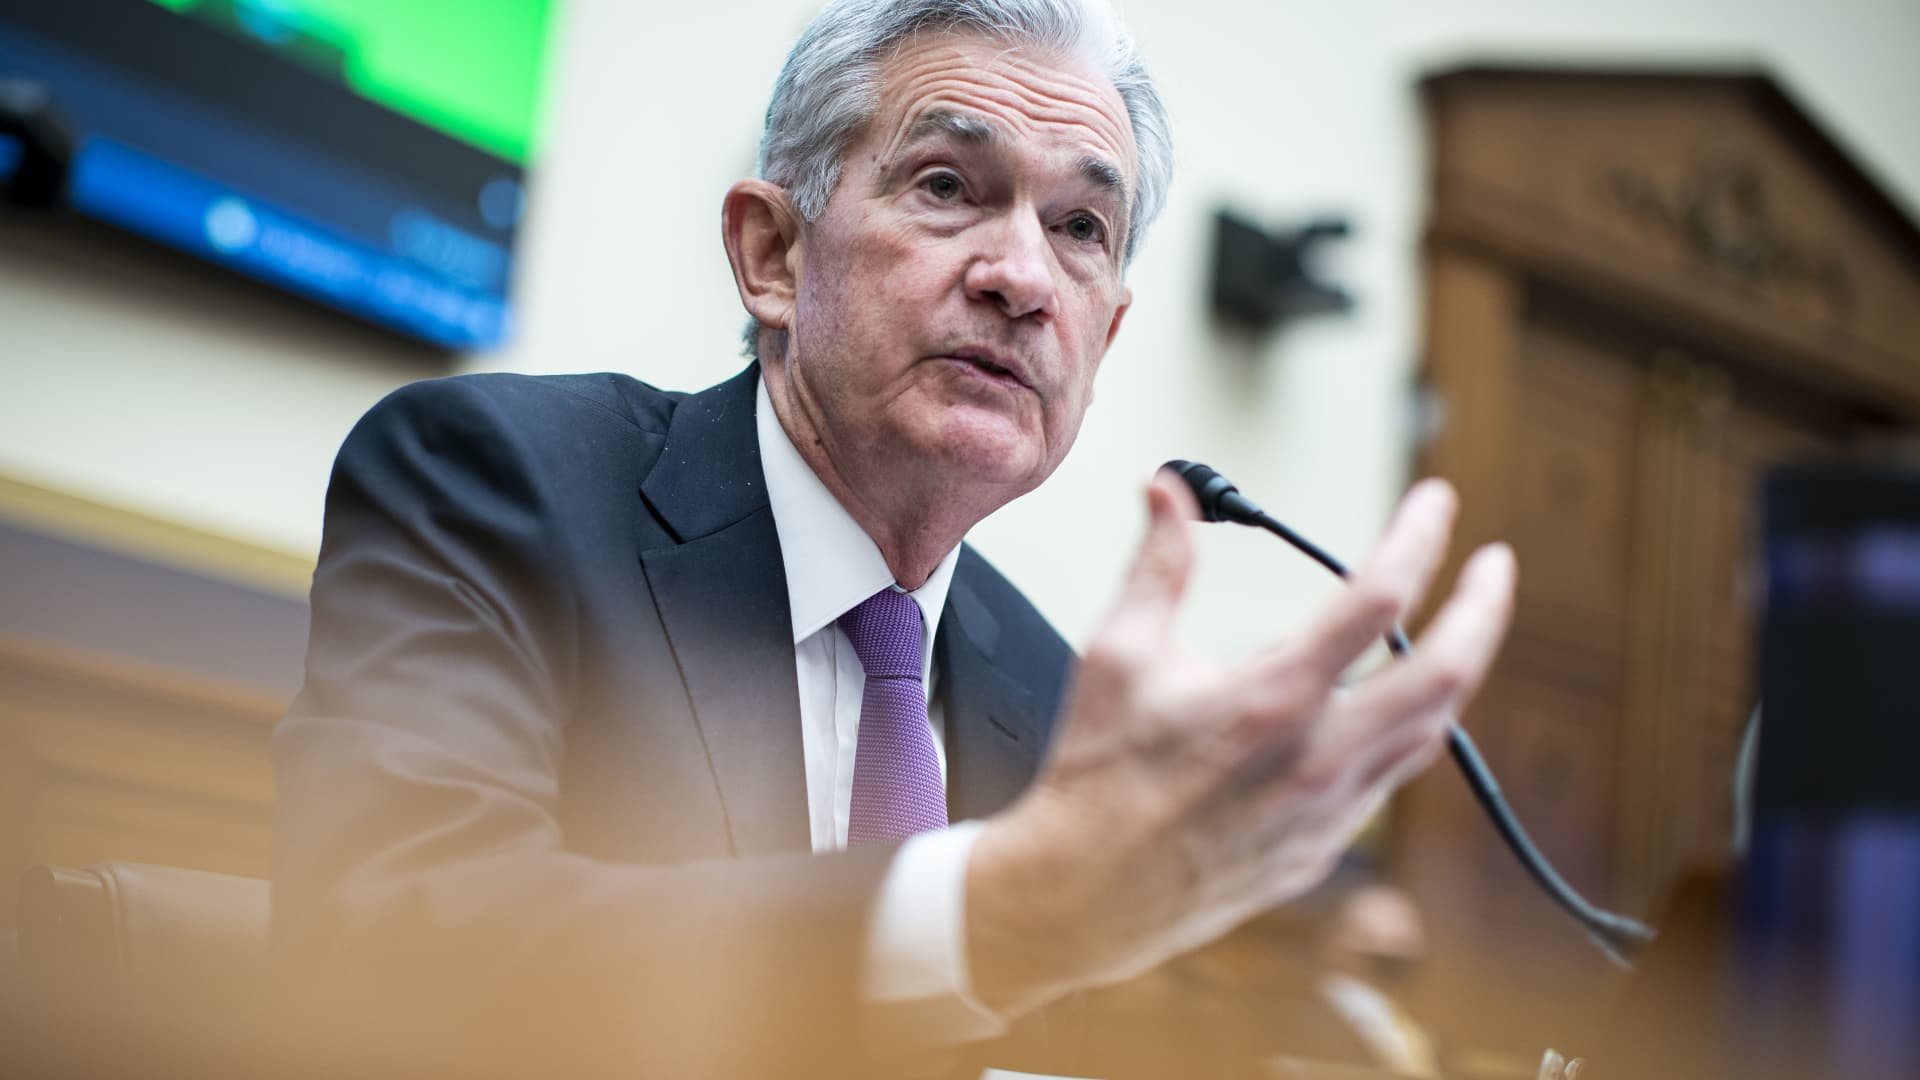 Jerome Powell, chairman of the U.S. Federal Reserve, speaks during a House Financial Committee hearing in Washington, D.C., on Wednesday, Dec. 1, 2021.